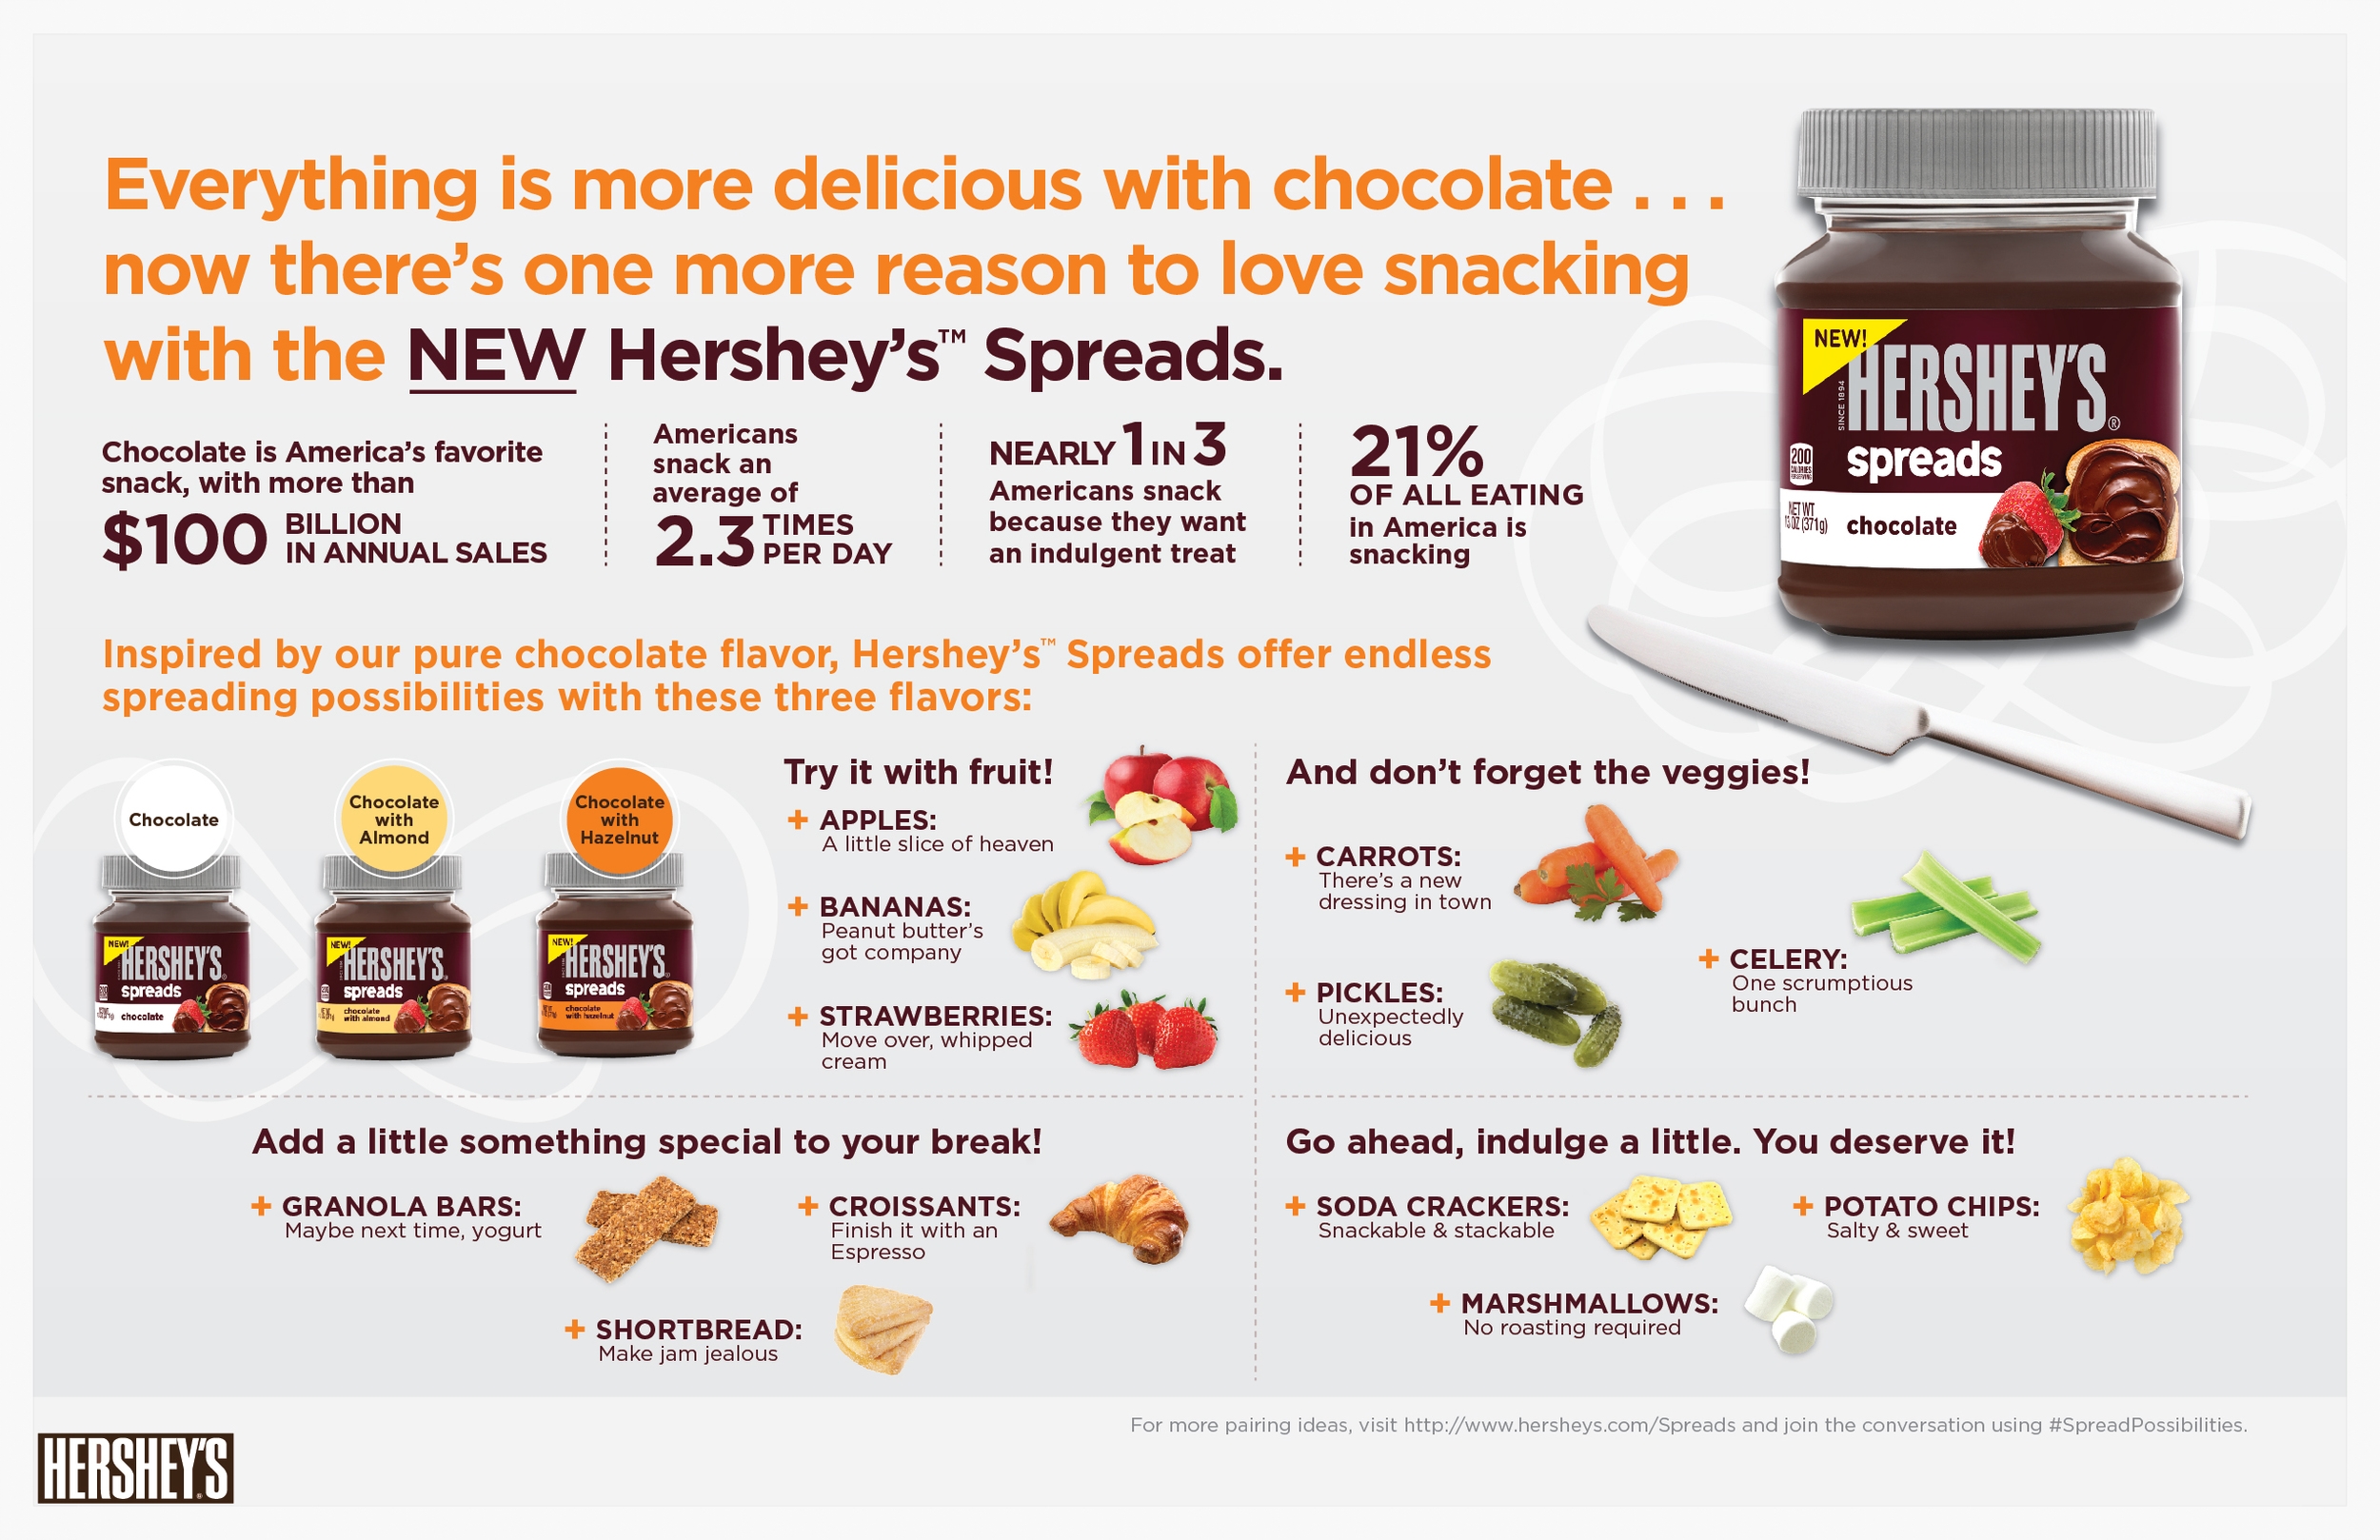 Hershey's New Spreads Infographic